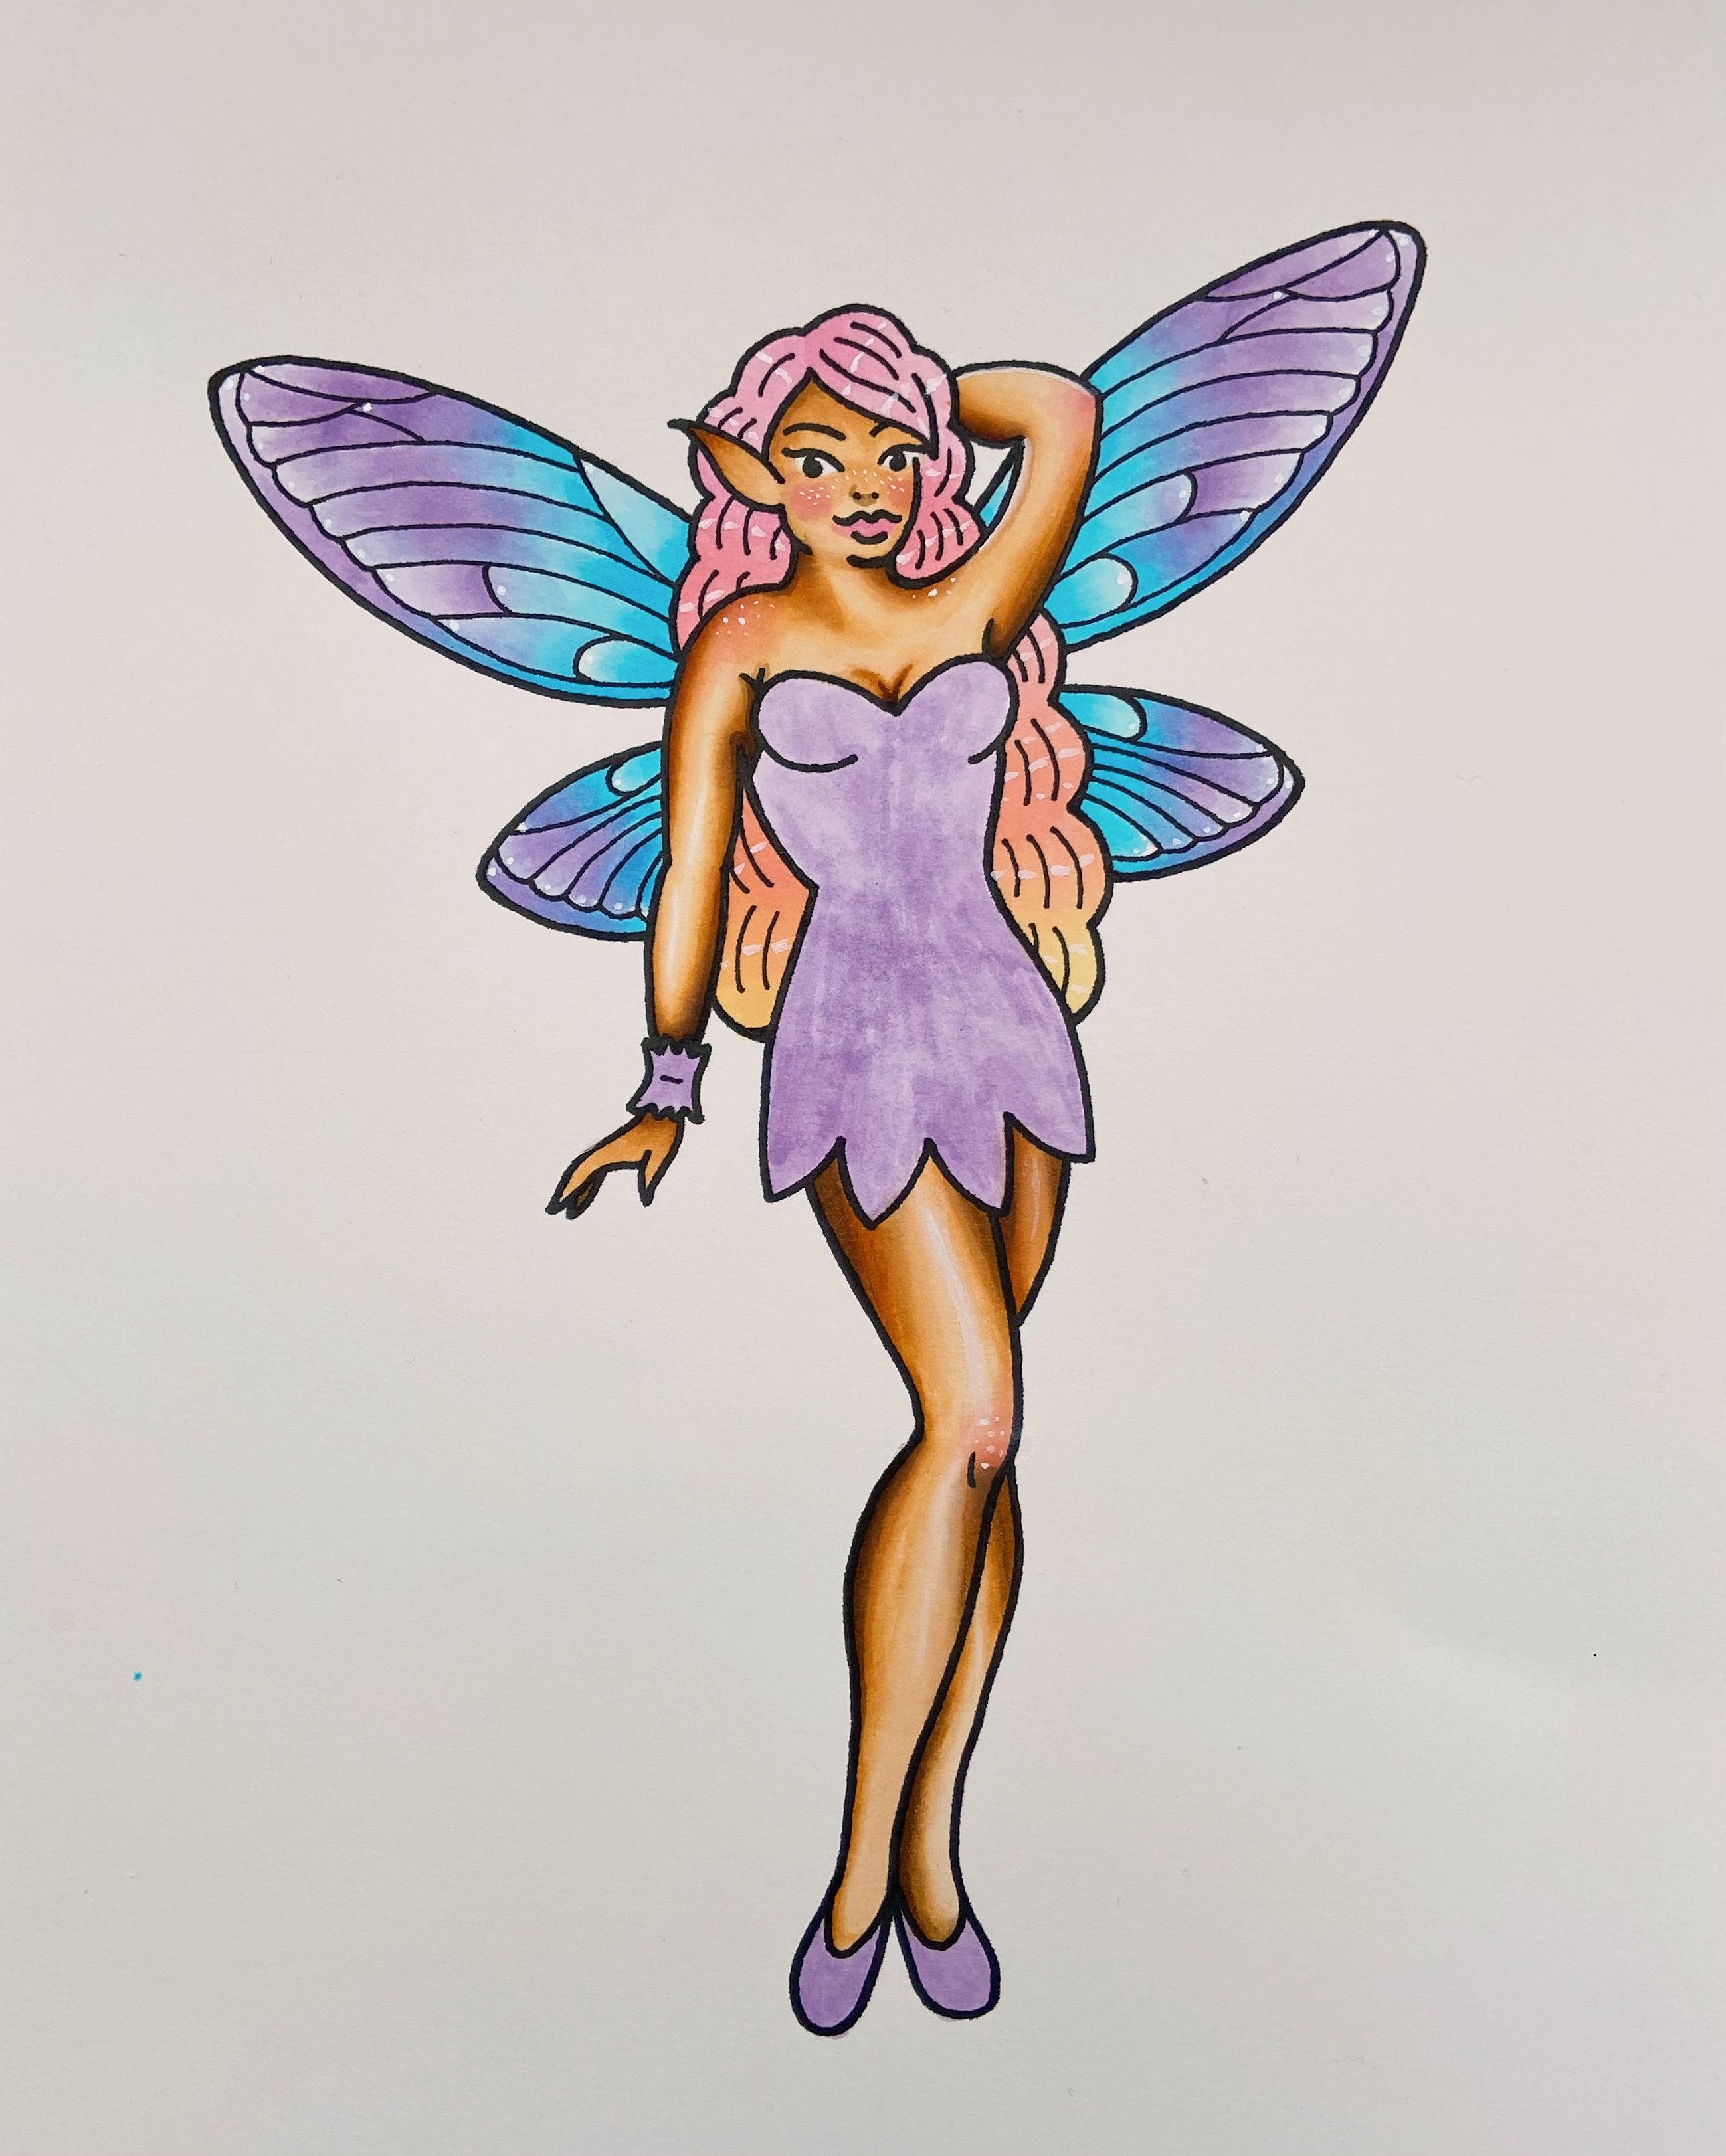 A bird fairy - colored pencils by f-a-d-i-l on DeviantArt